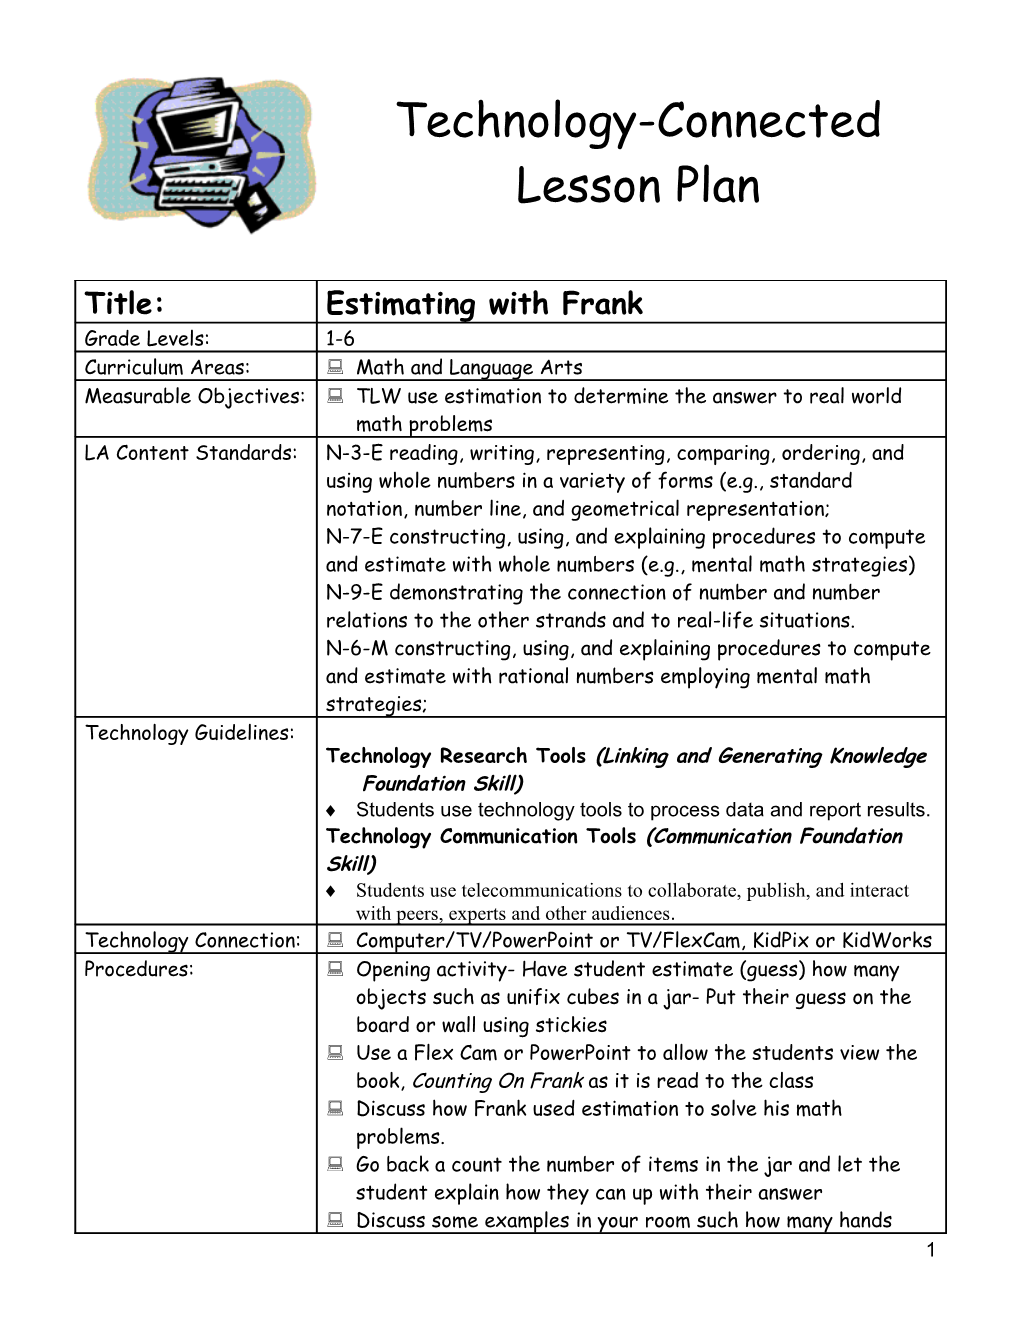 Technology-Connected Lesson Plan s7